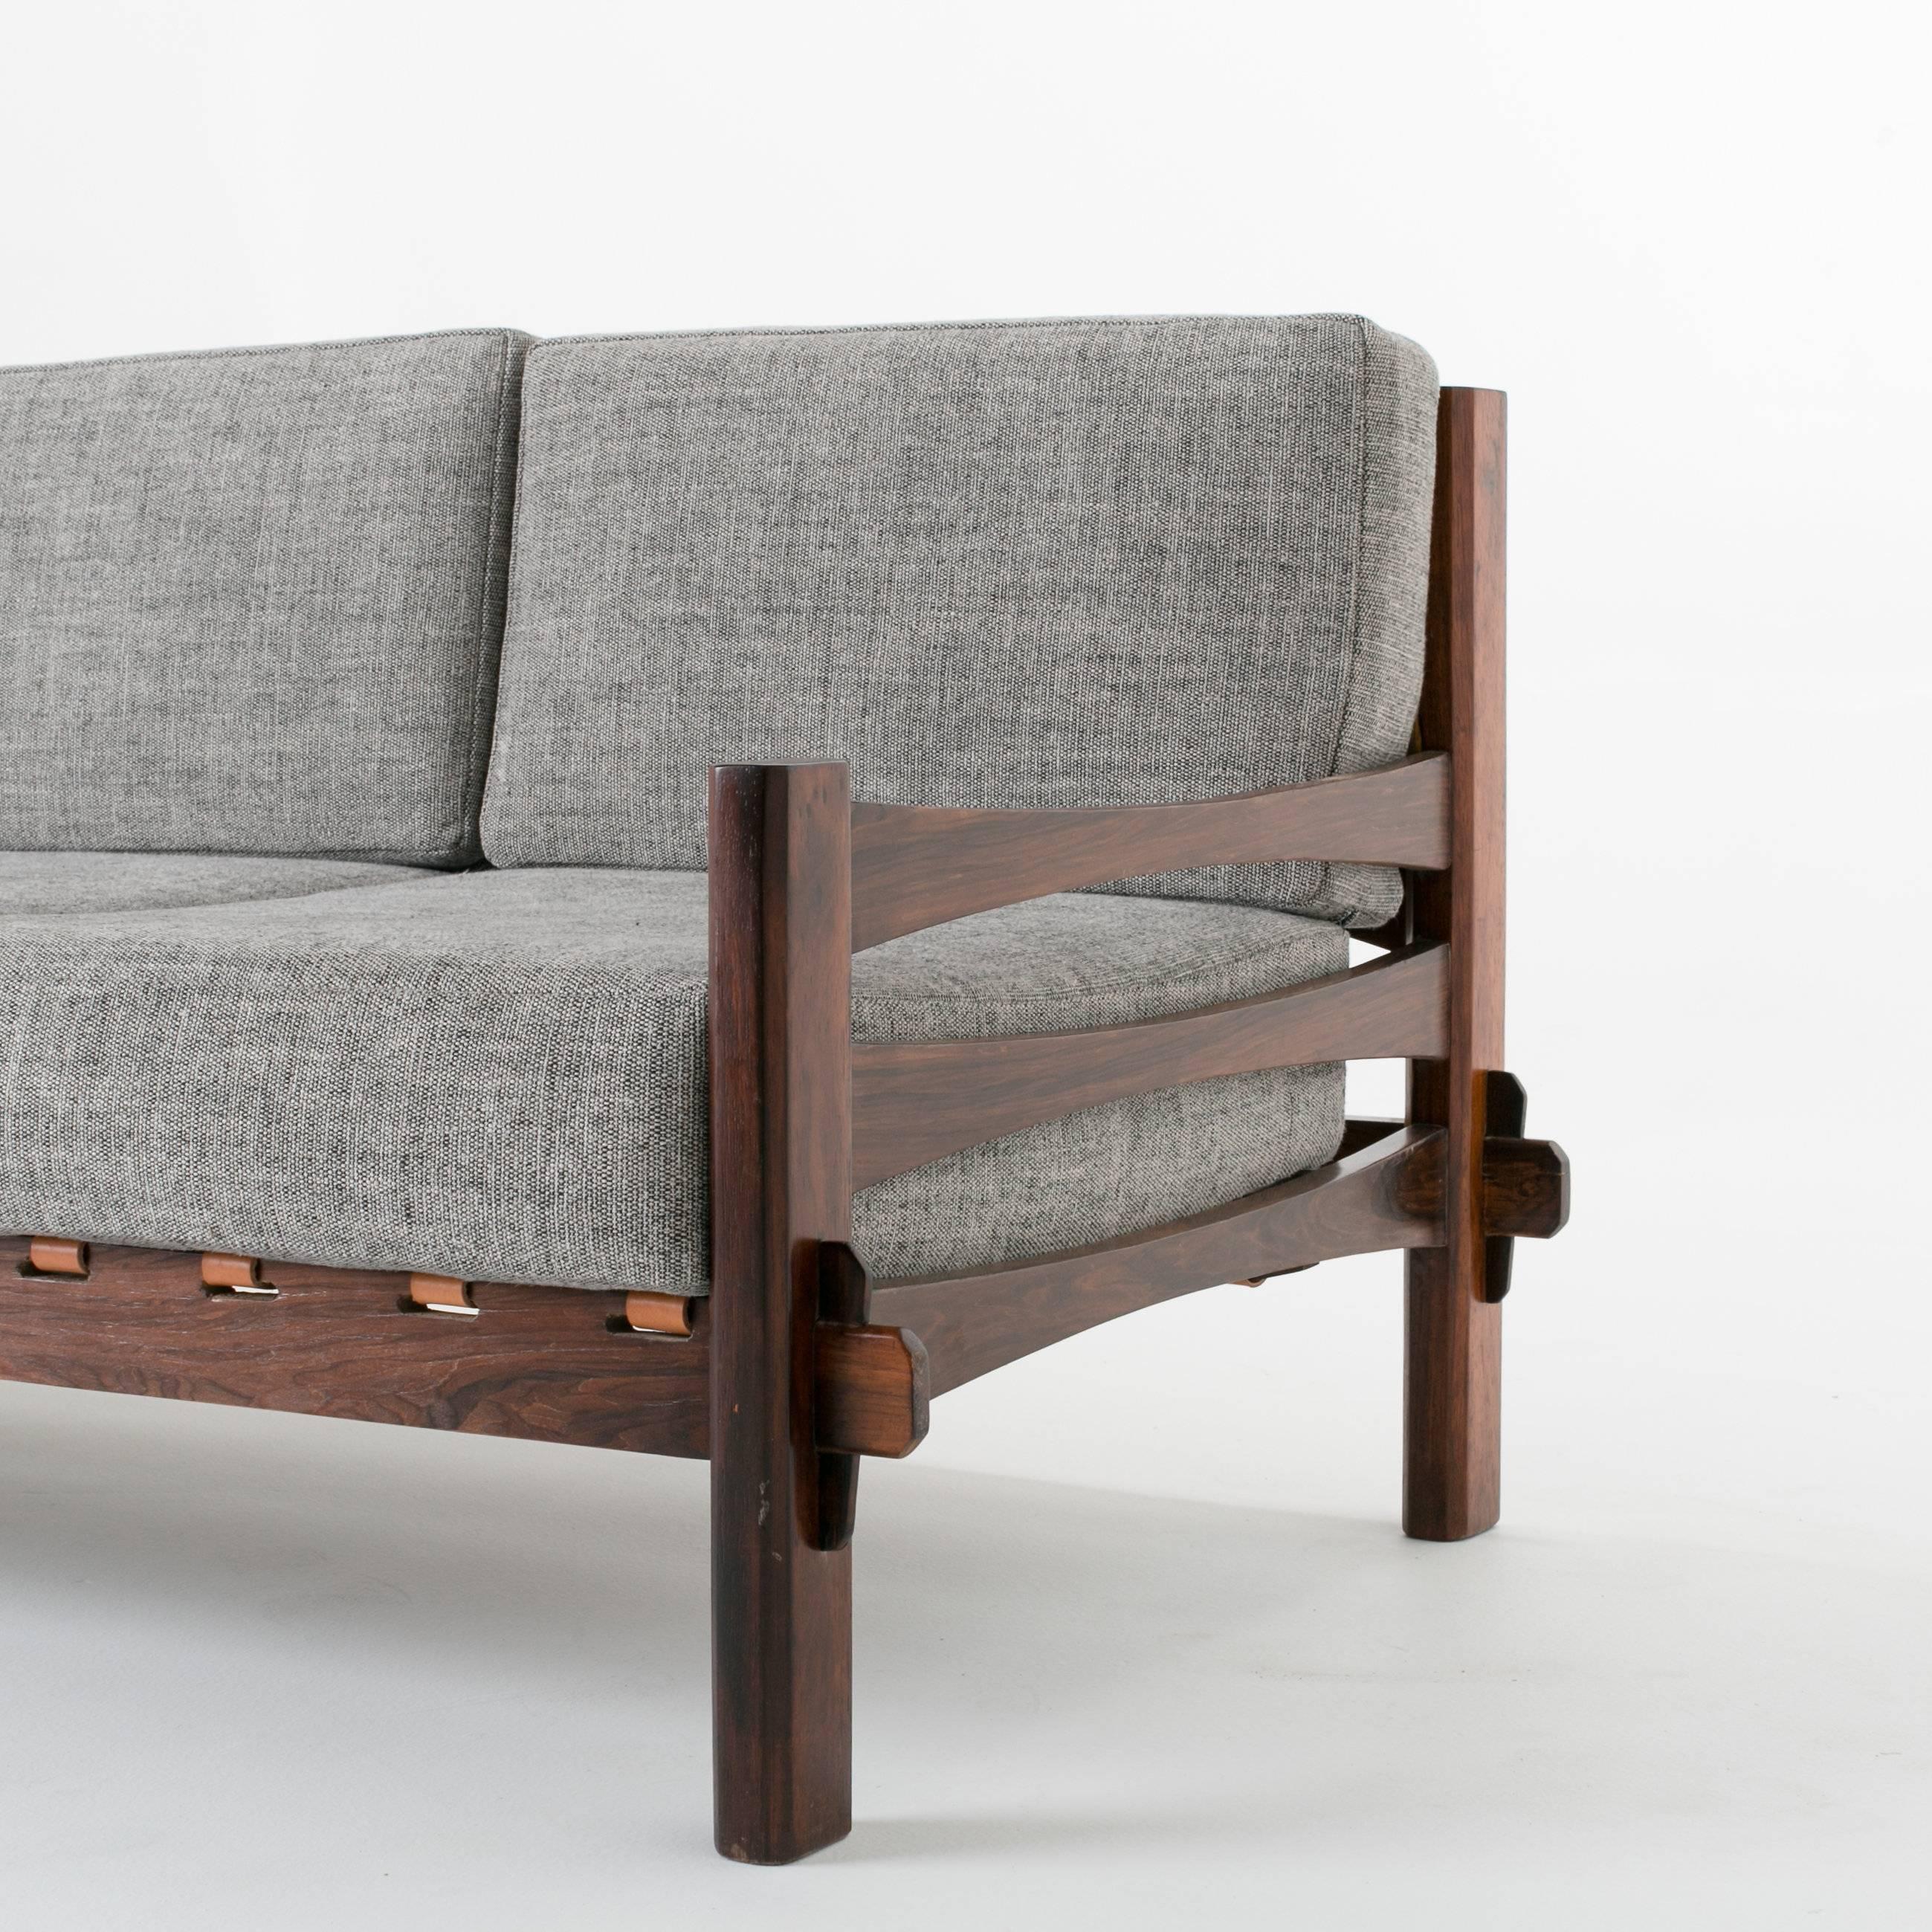 Late 20th Century Brazilian Rosewood and Leather Strap Sculptural Sofa  For Sale